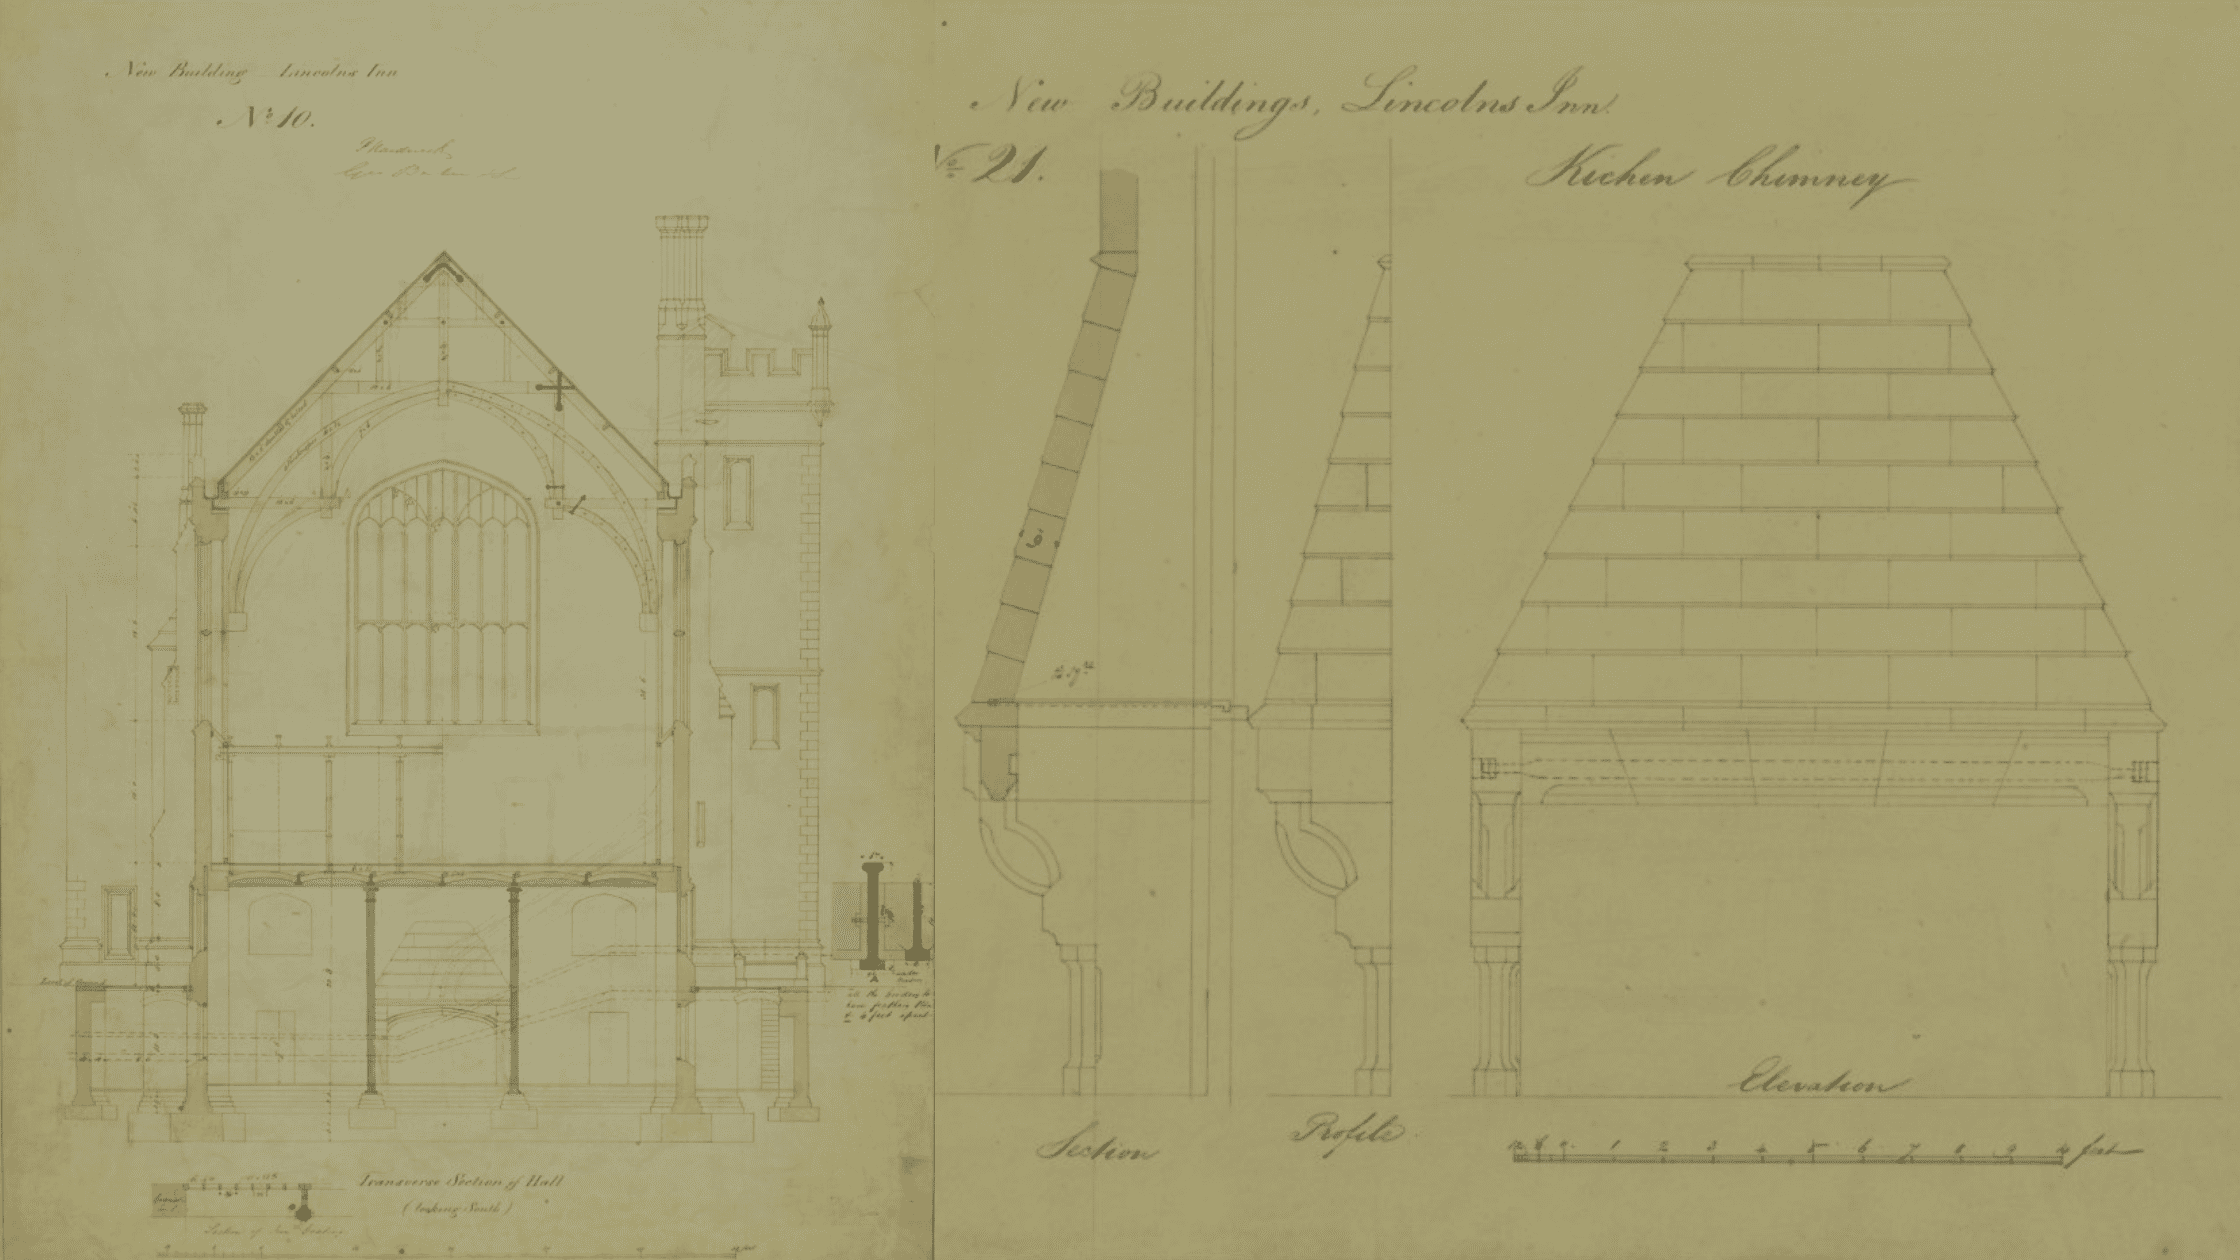 Old blueprints of historic venue cross section